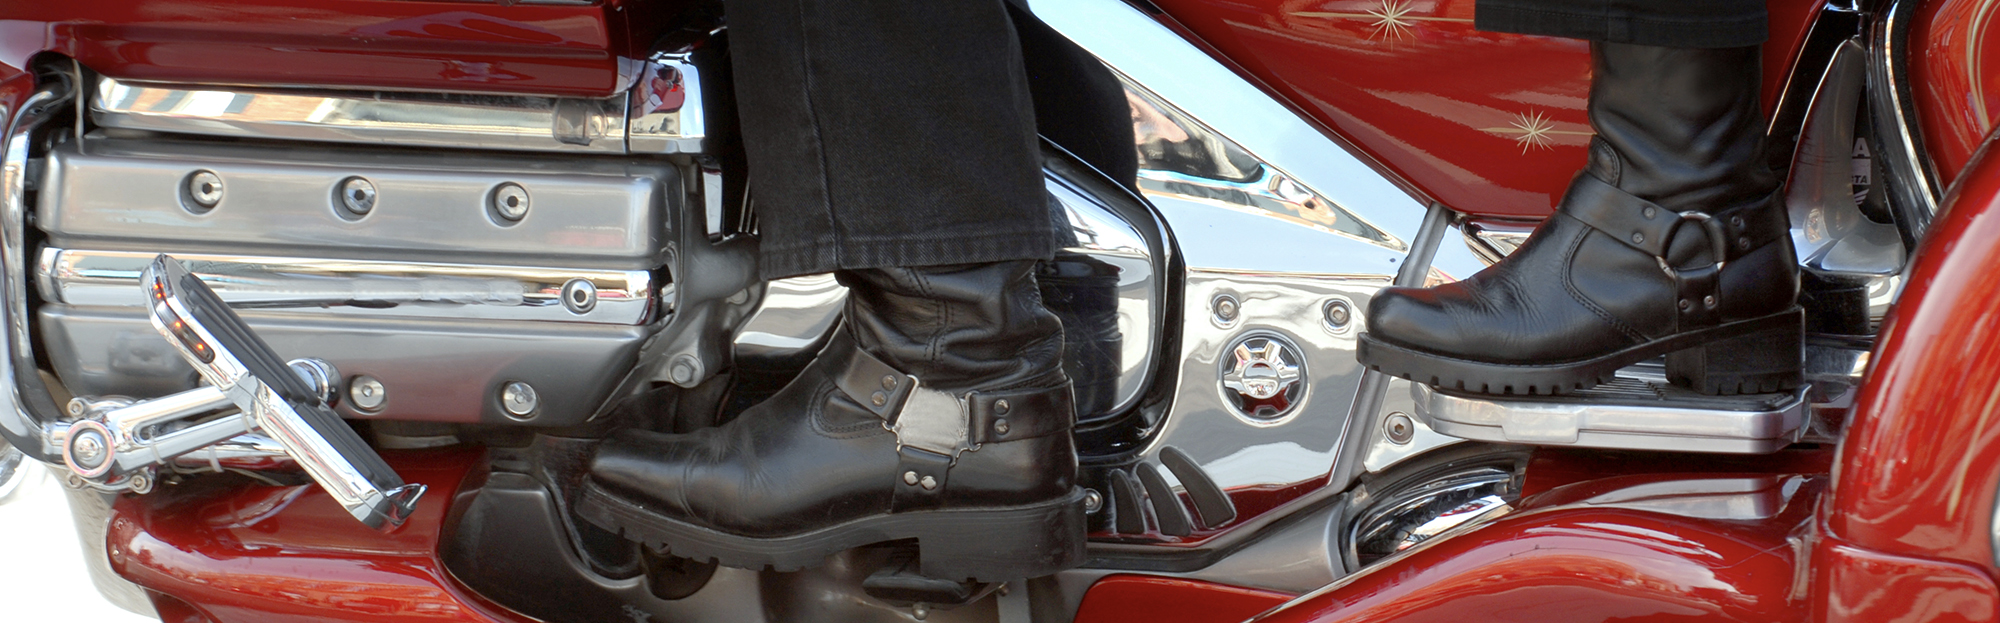 Motorcycle riders wear the right kind of boots.